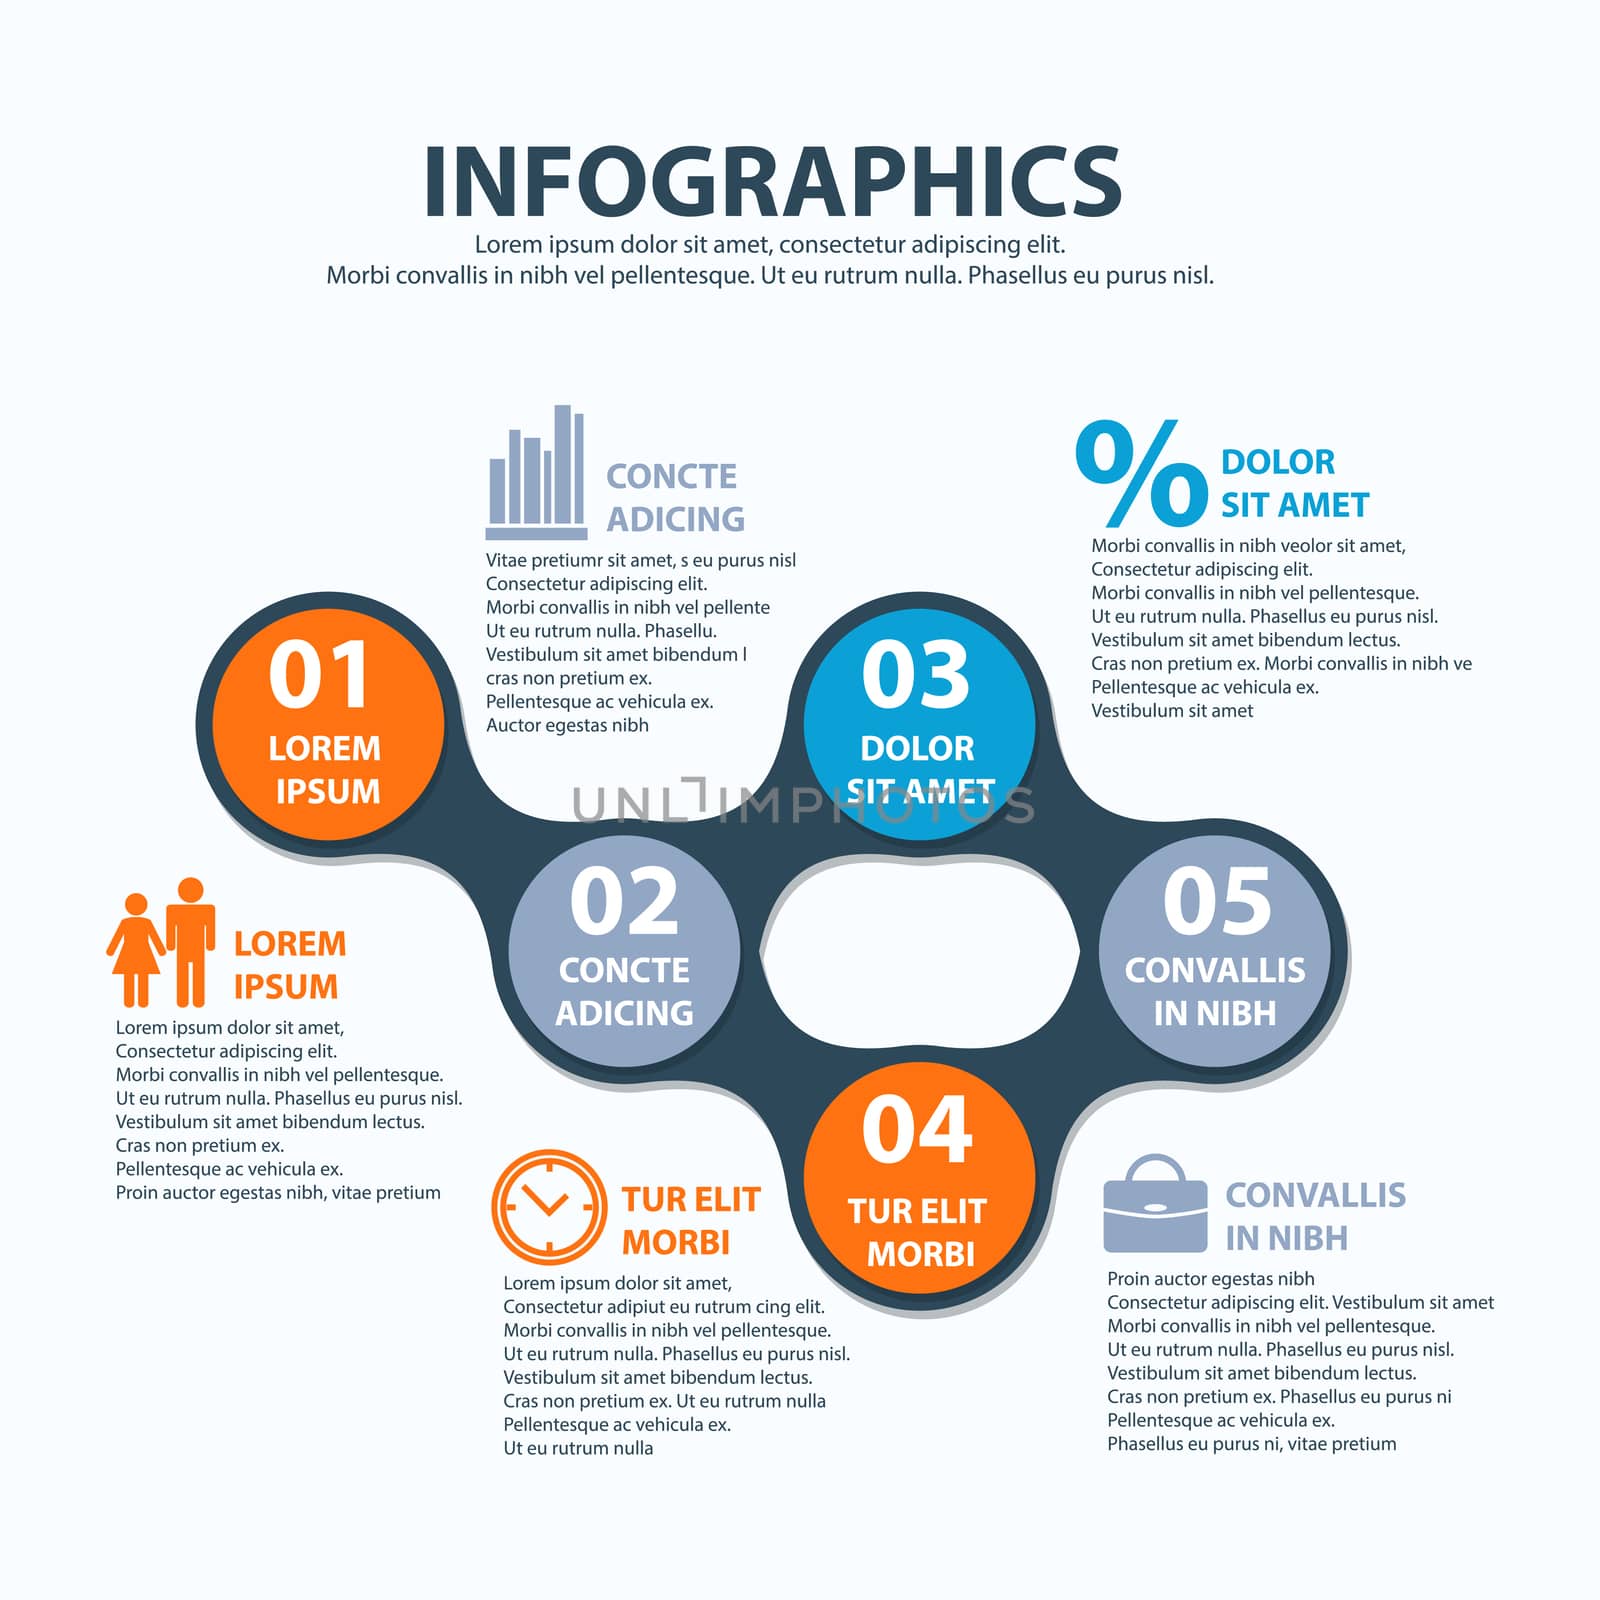 Business Infographics circle origami style. can be used for workflow layout, banner, diagram, number options, step up options, web design. illustration